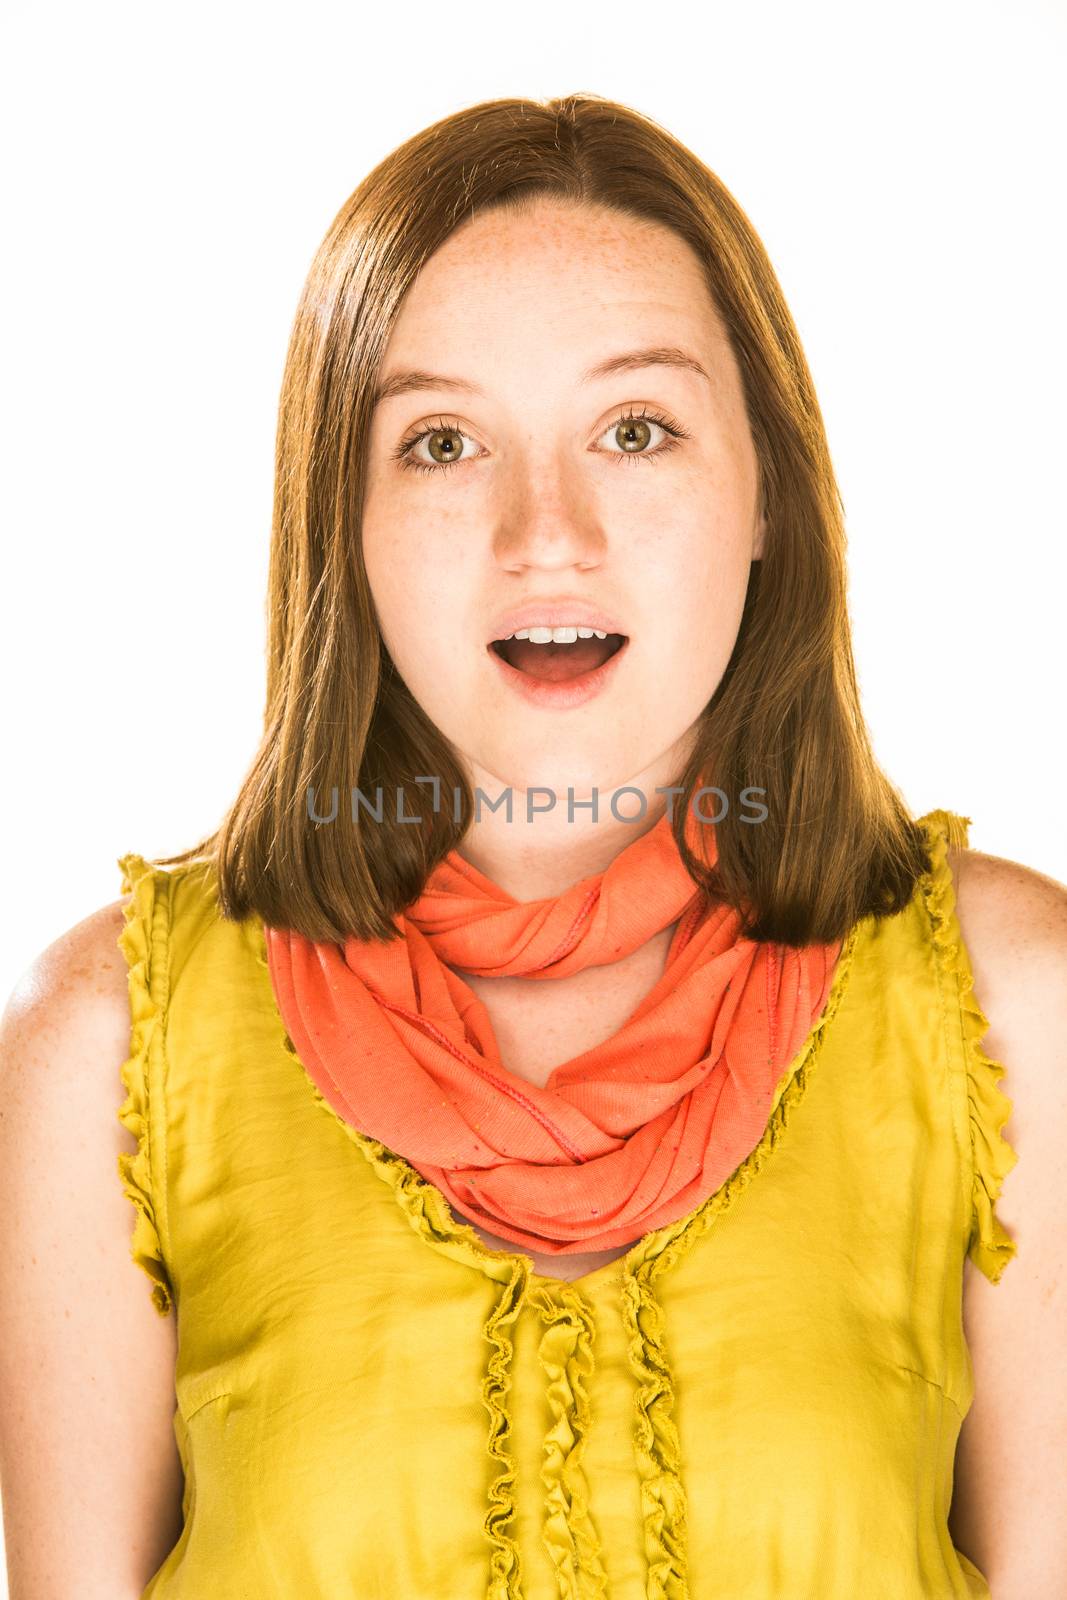 Pretty girl with a wonder filled expression on white background